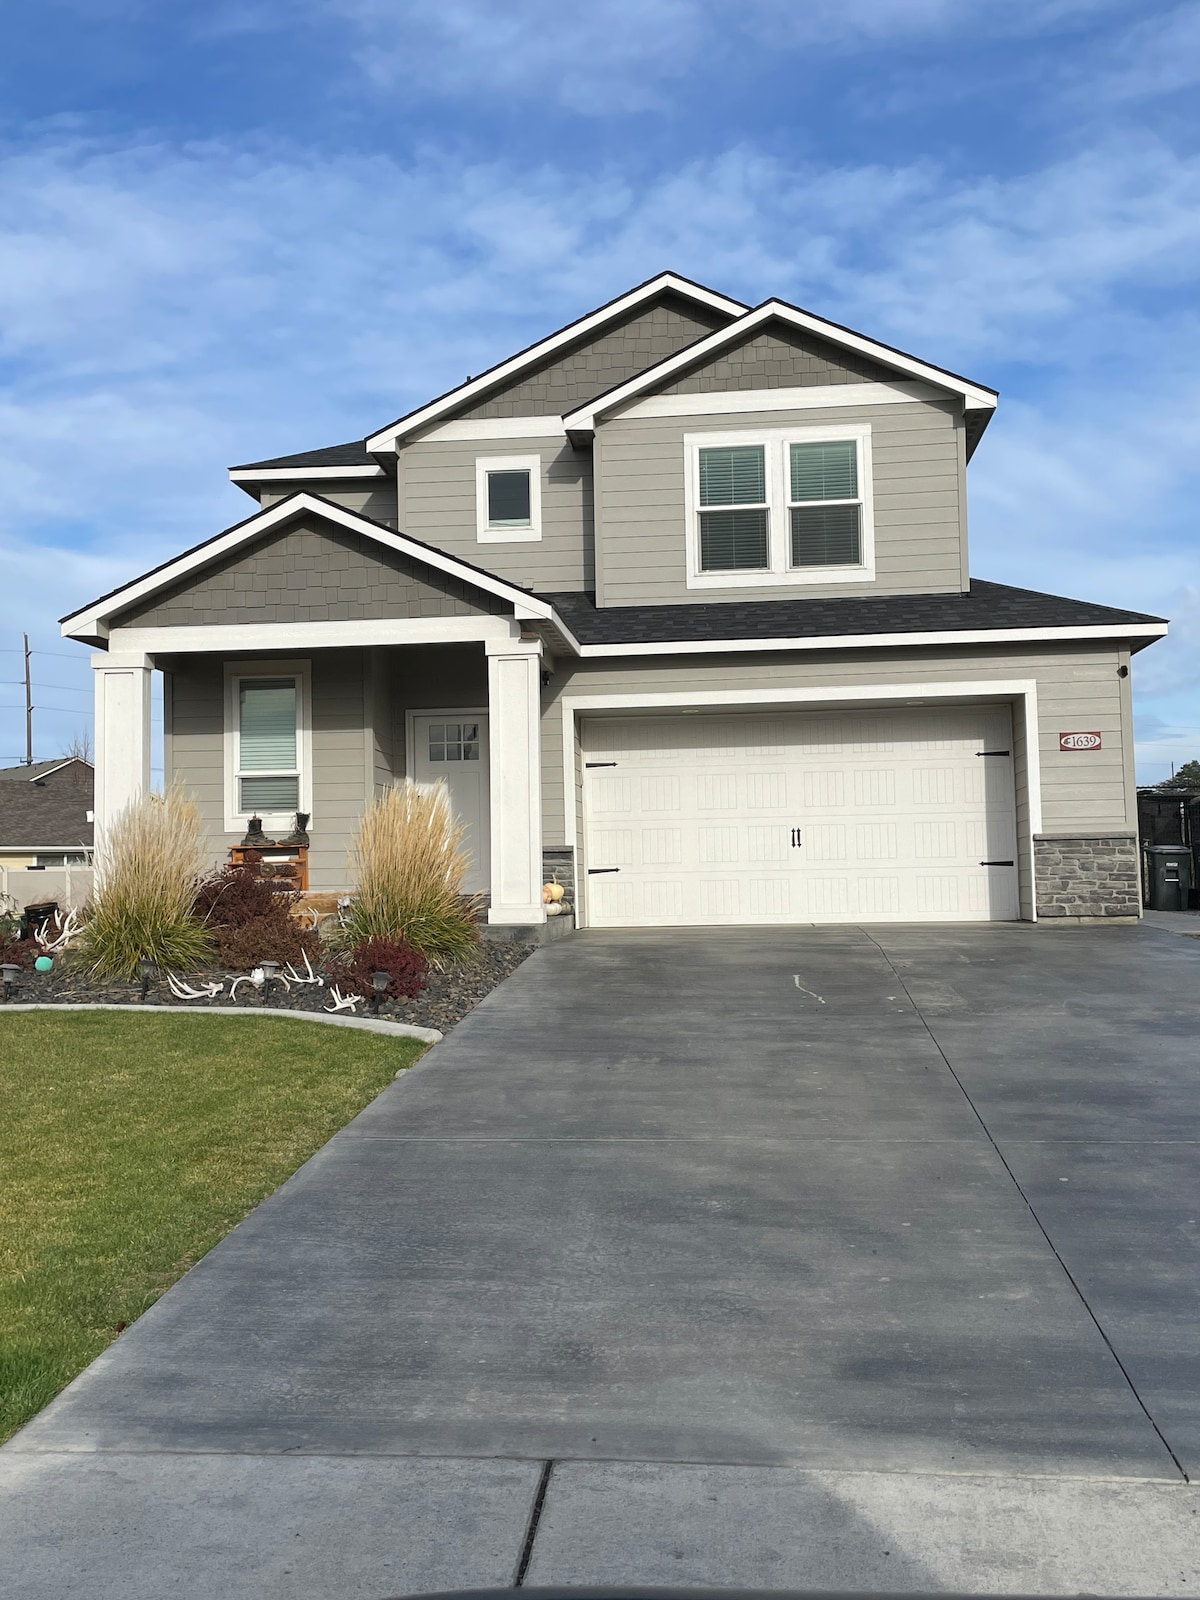 3 Bedroom Home Centrally Located in Moses Lake